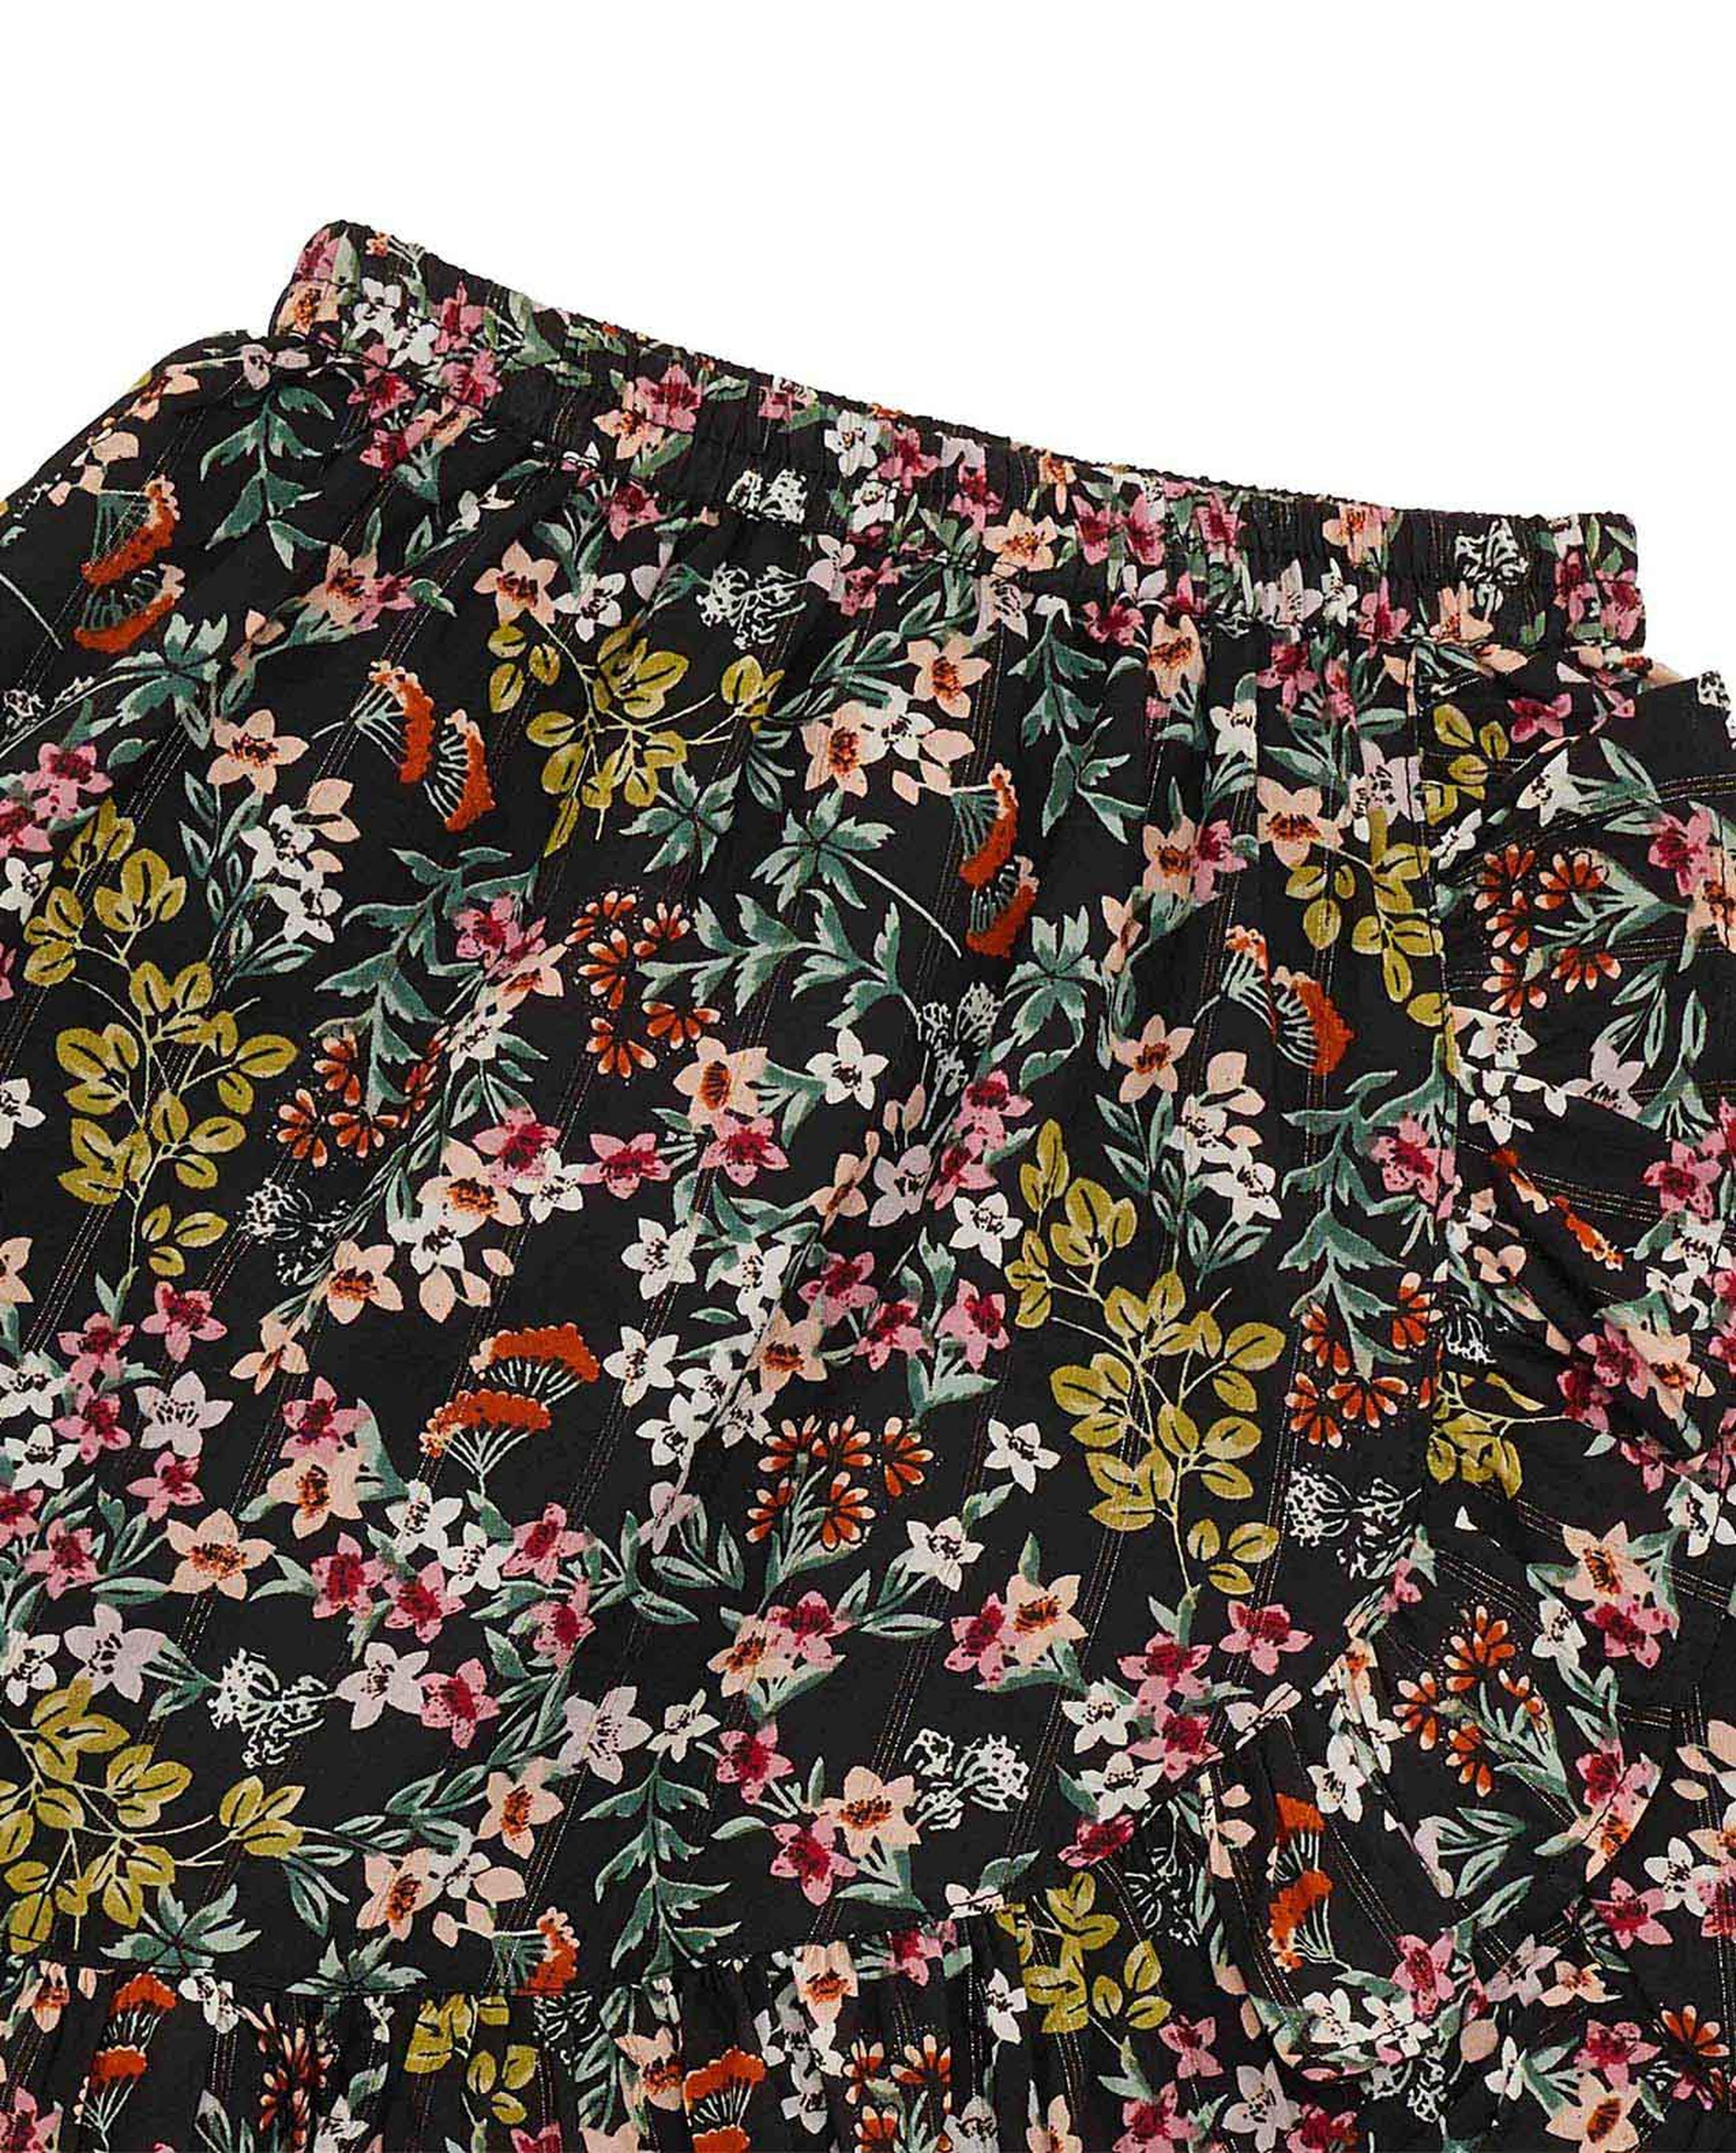 Floral Printed Flared Skirt